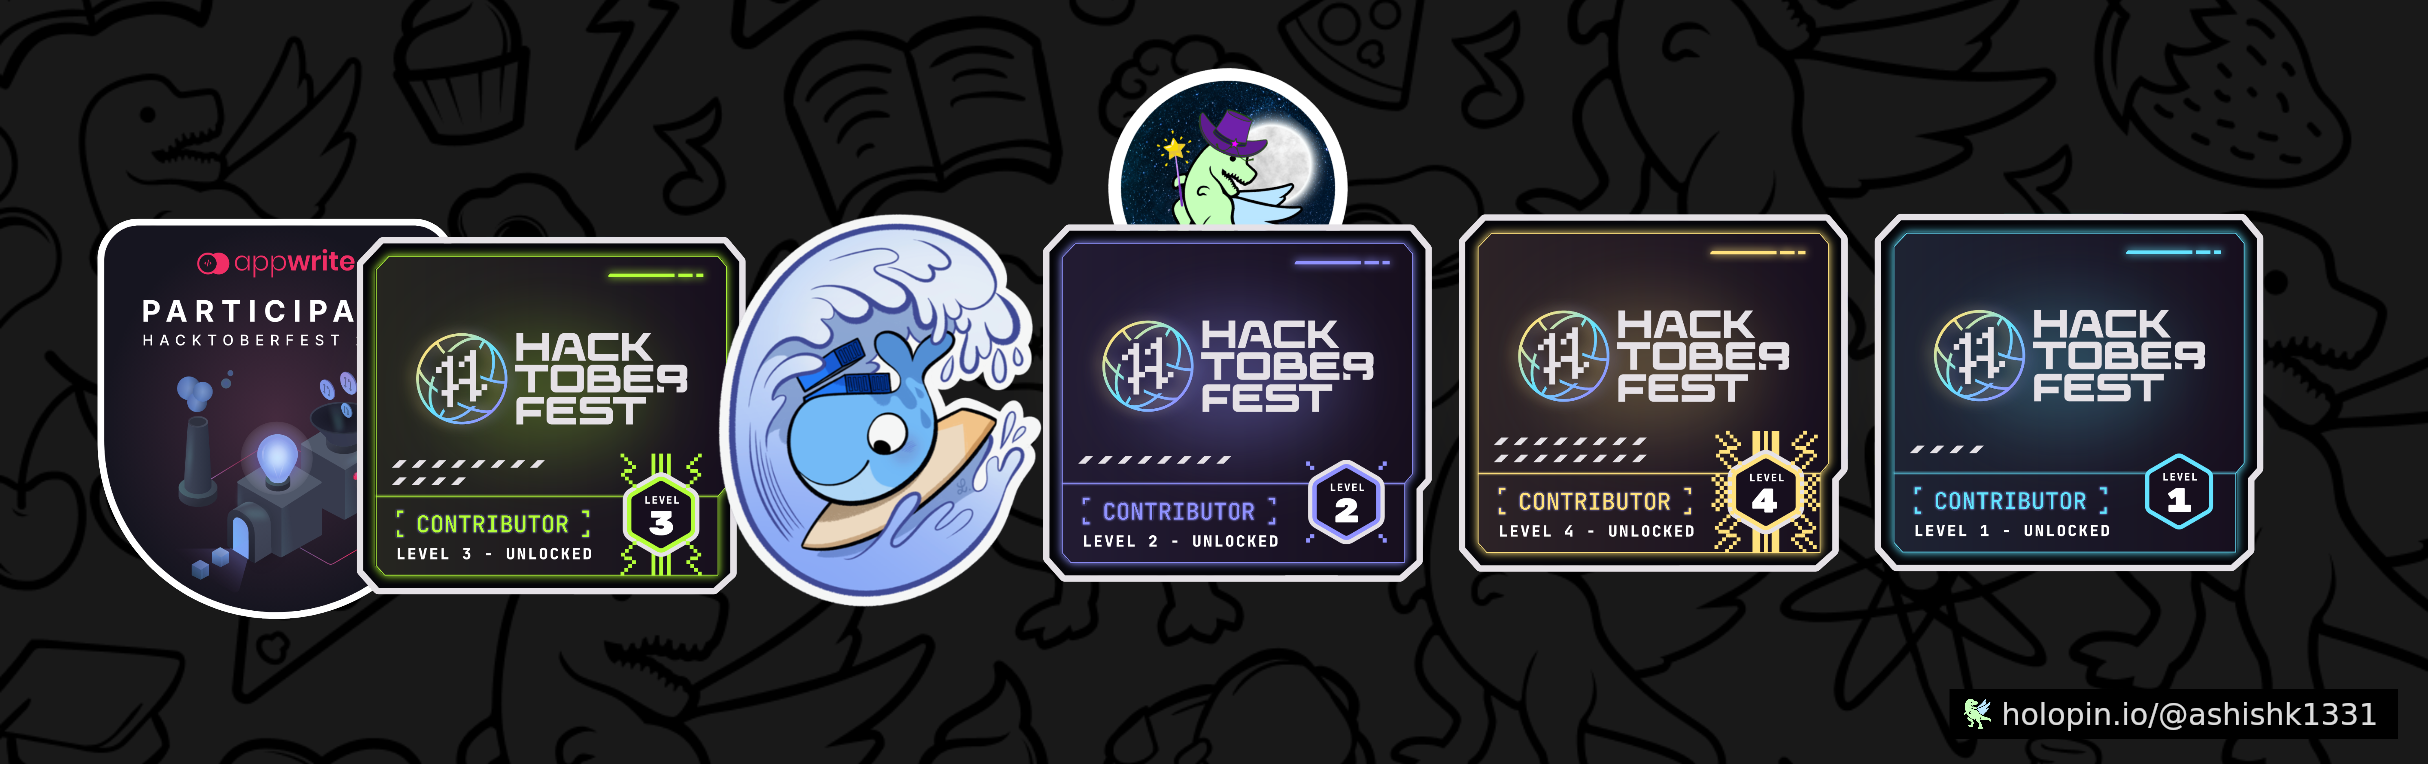 An image of @ashishk1331's Holopin badges, which is a link to view their full Holopin profile